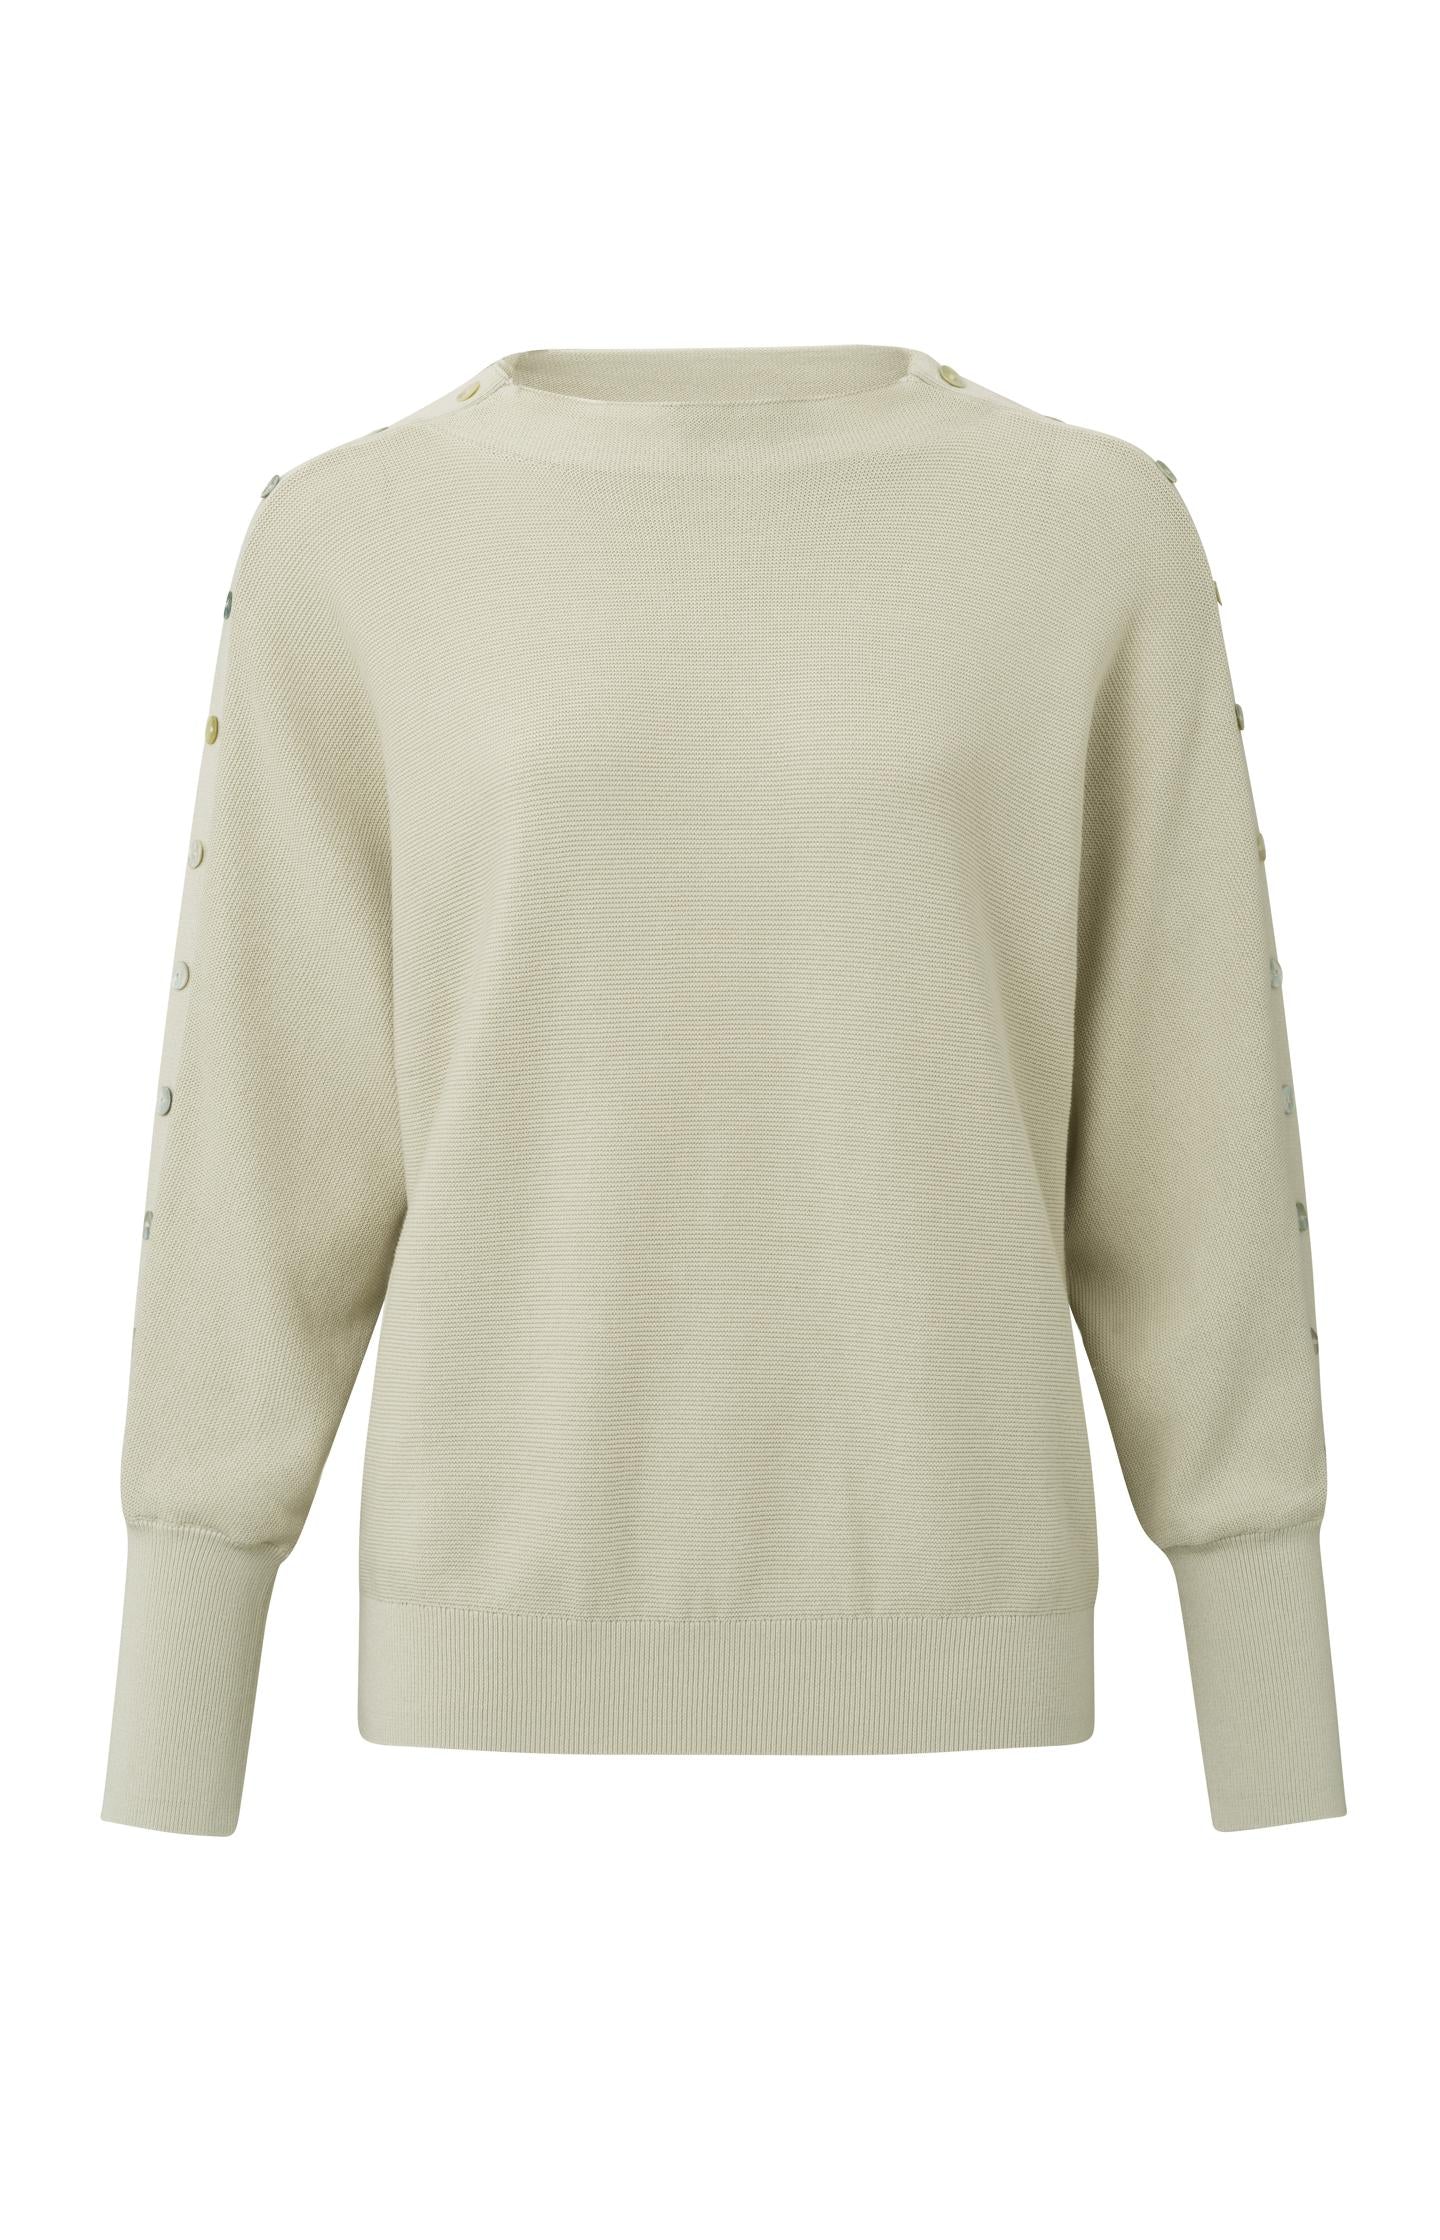 Sweater with round neck, long sleeves and buttons details - Type: product